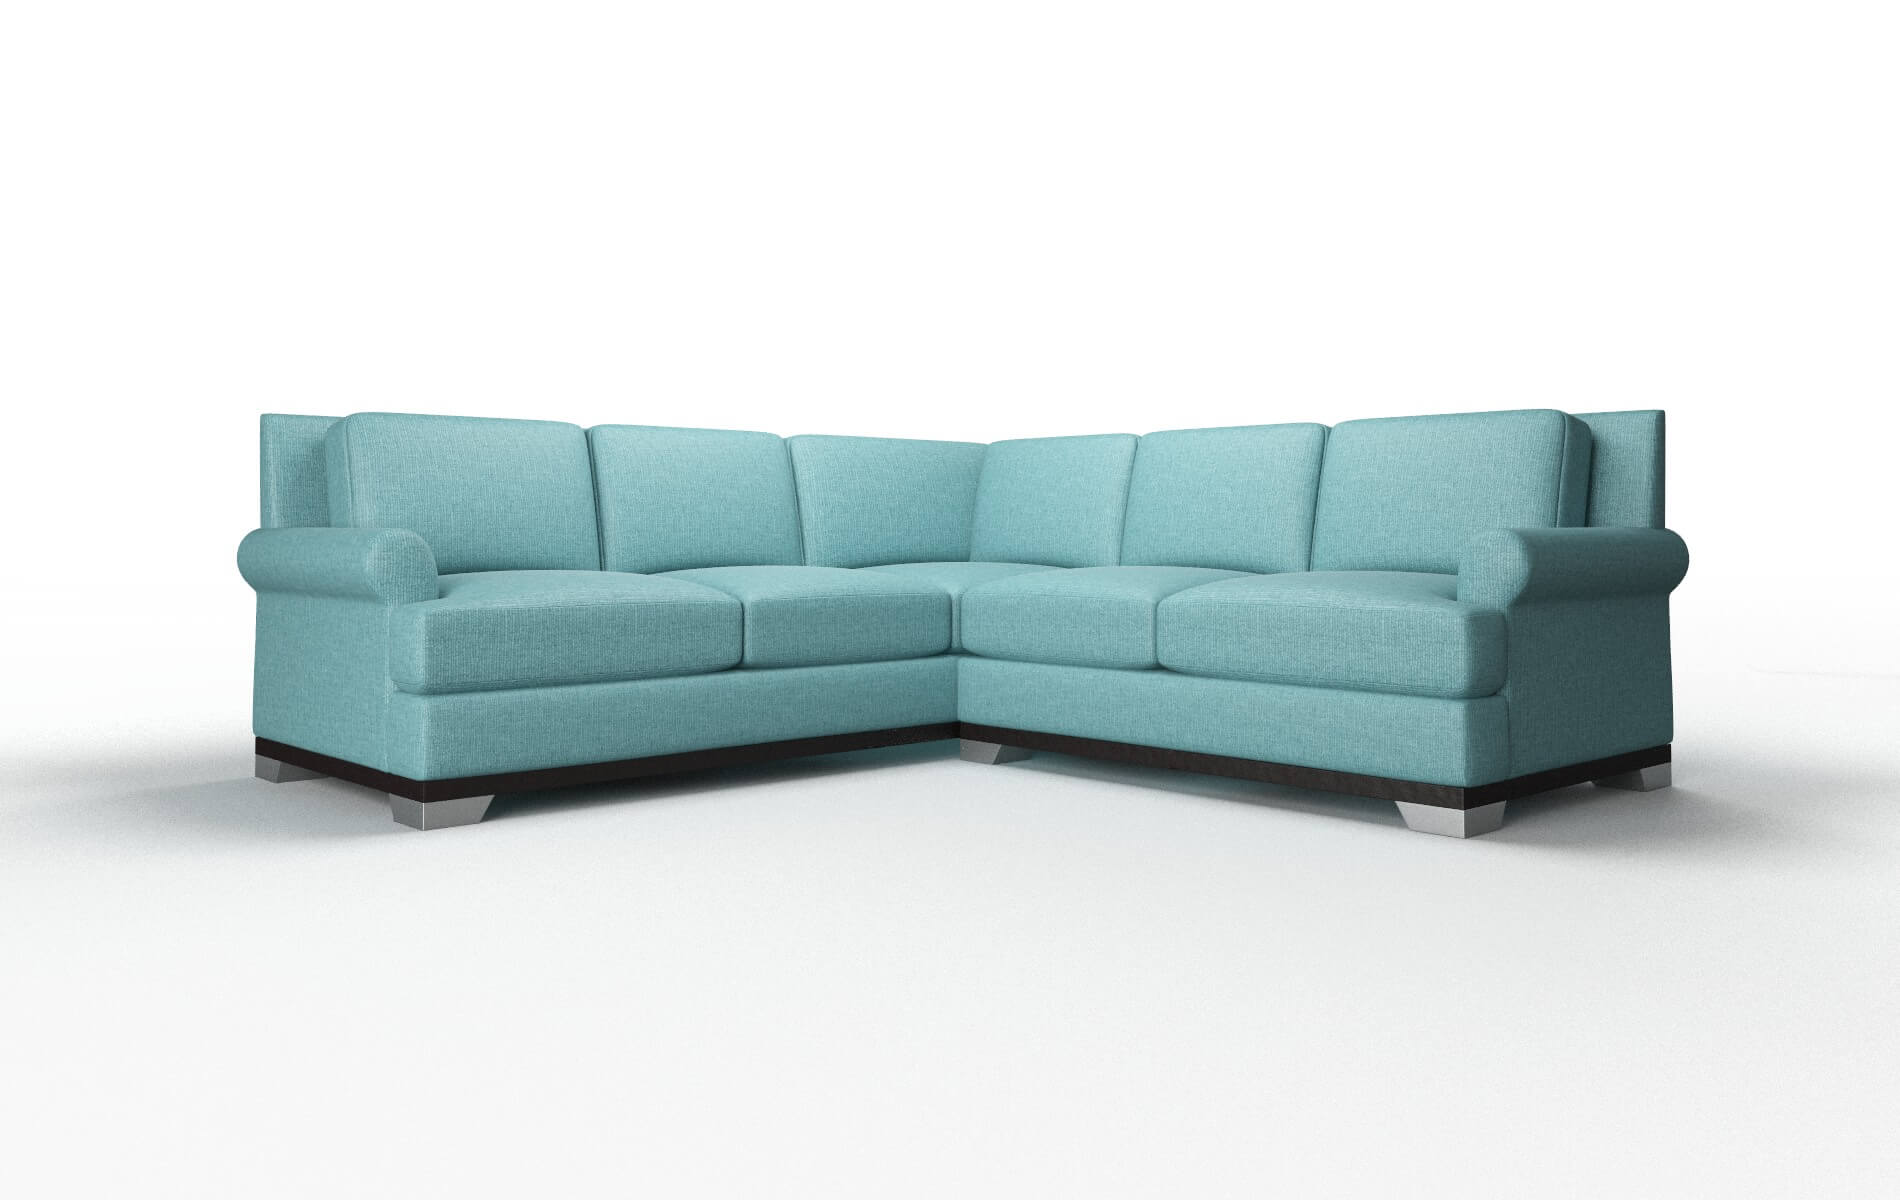 Newyork Parker Turquoise Sectional espresso legs